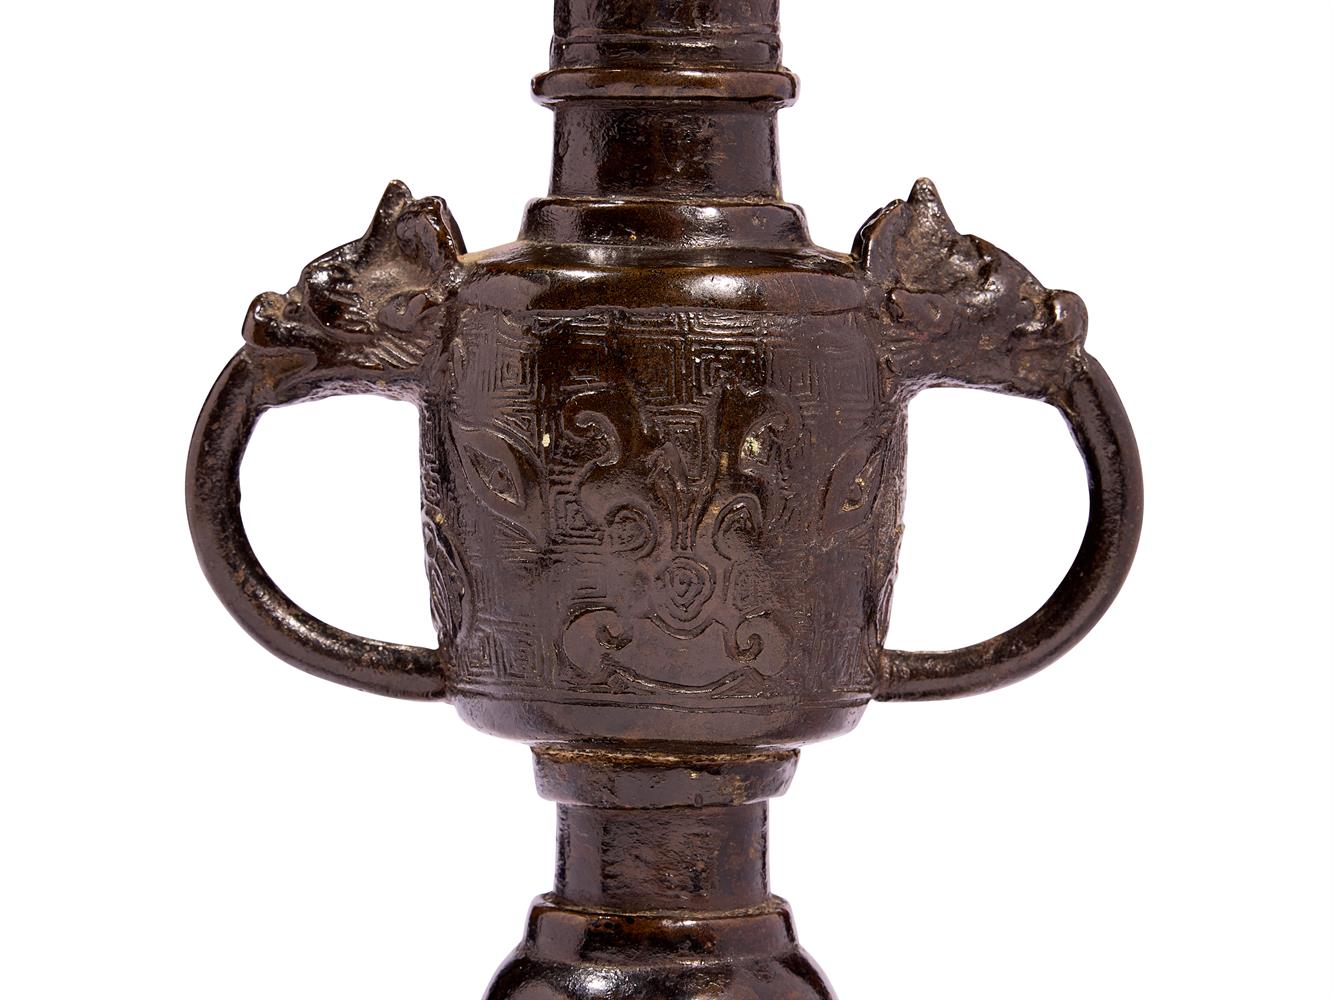 A CHINESE BRONZE GU VASE, MING DYNASTY - Image 2 of 2